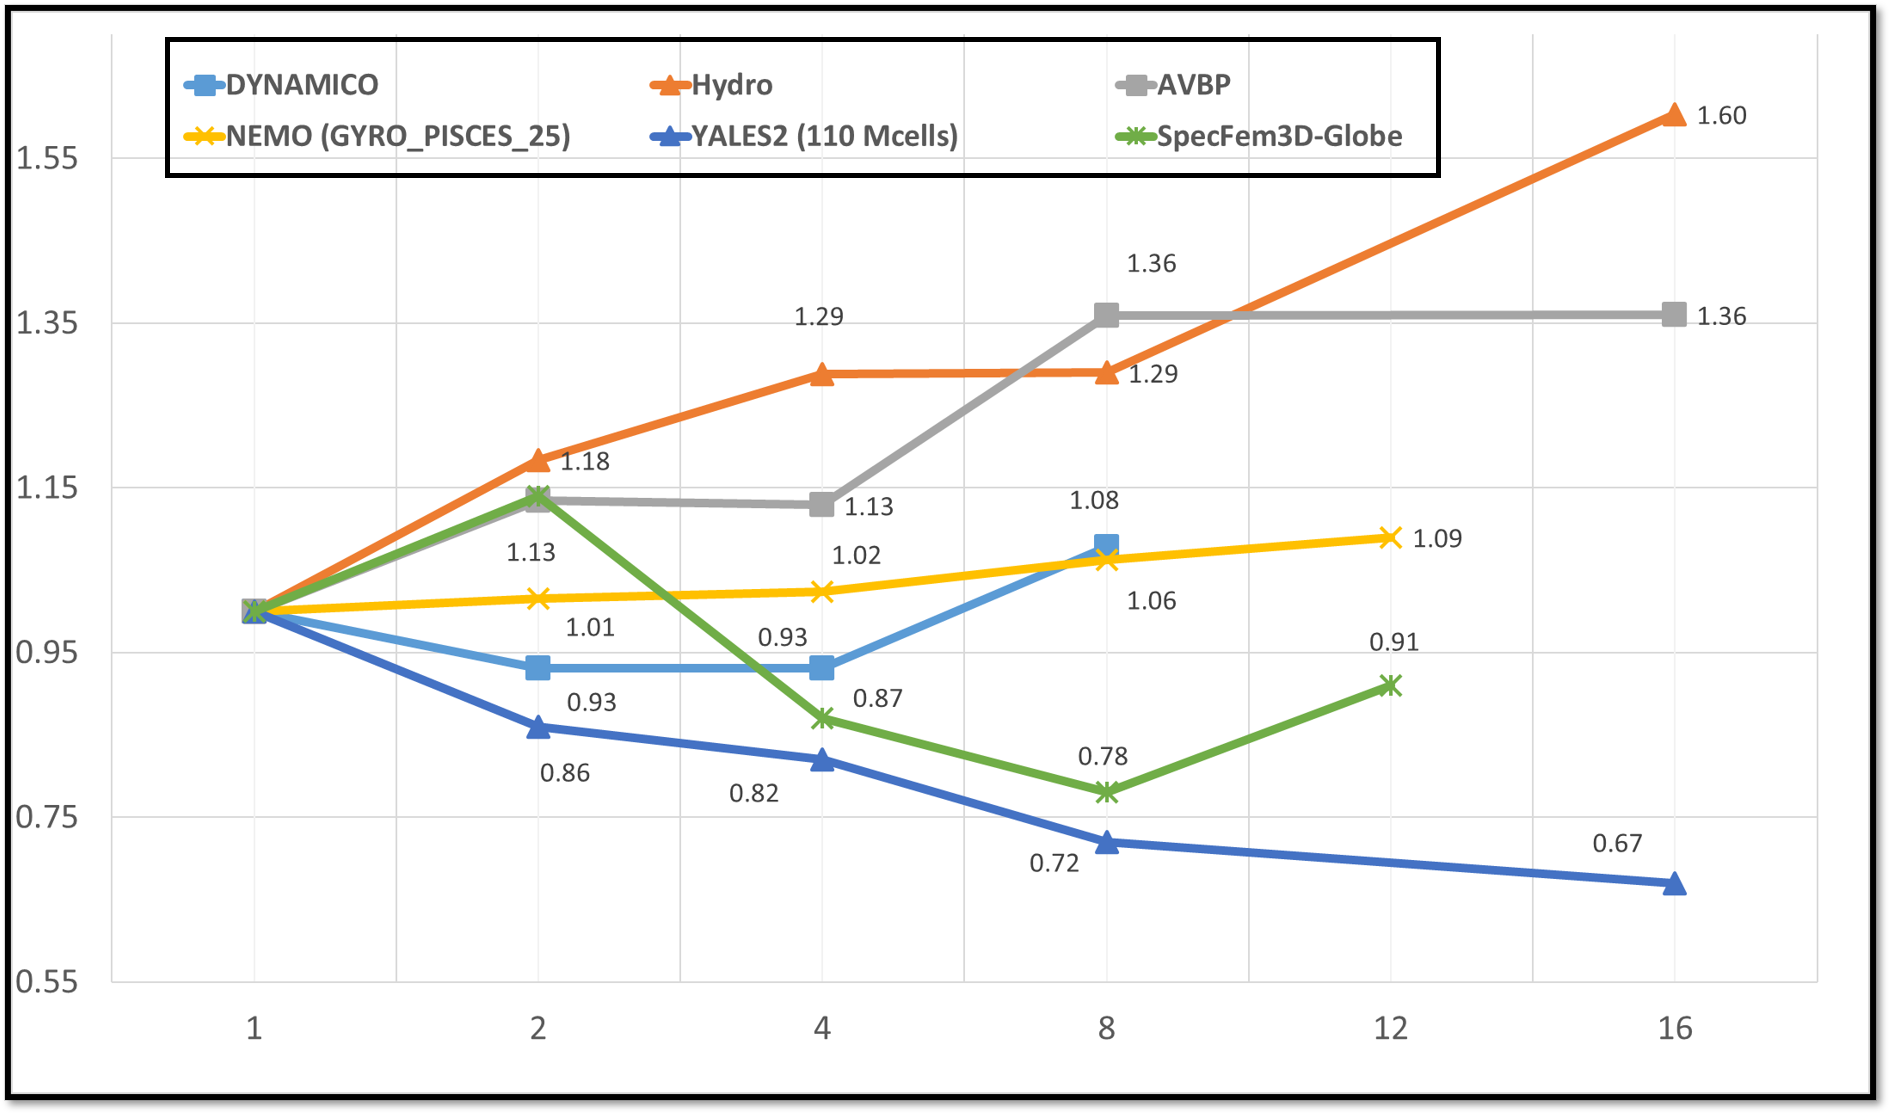  Improvement of the scalability results after fine tuning of the MPI software stack (OpenMPI 4.0.2).